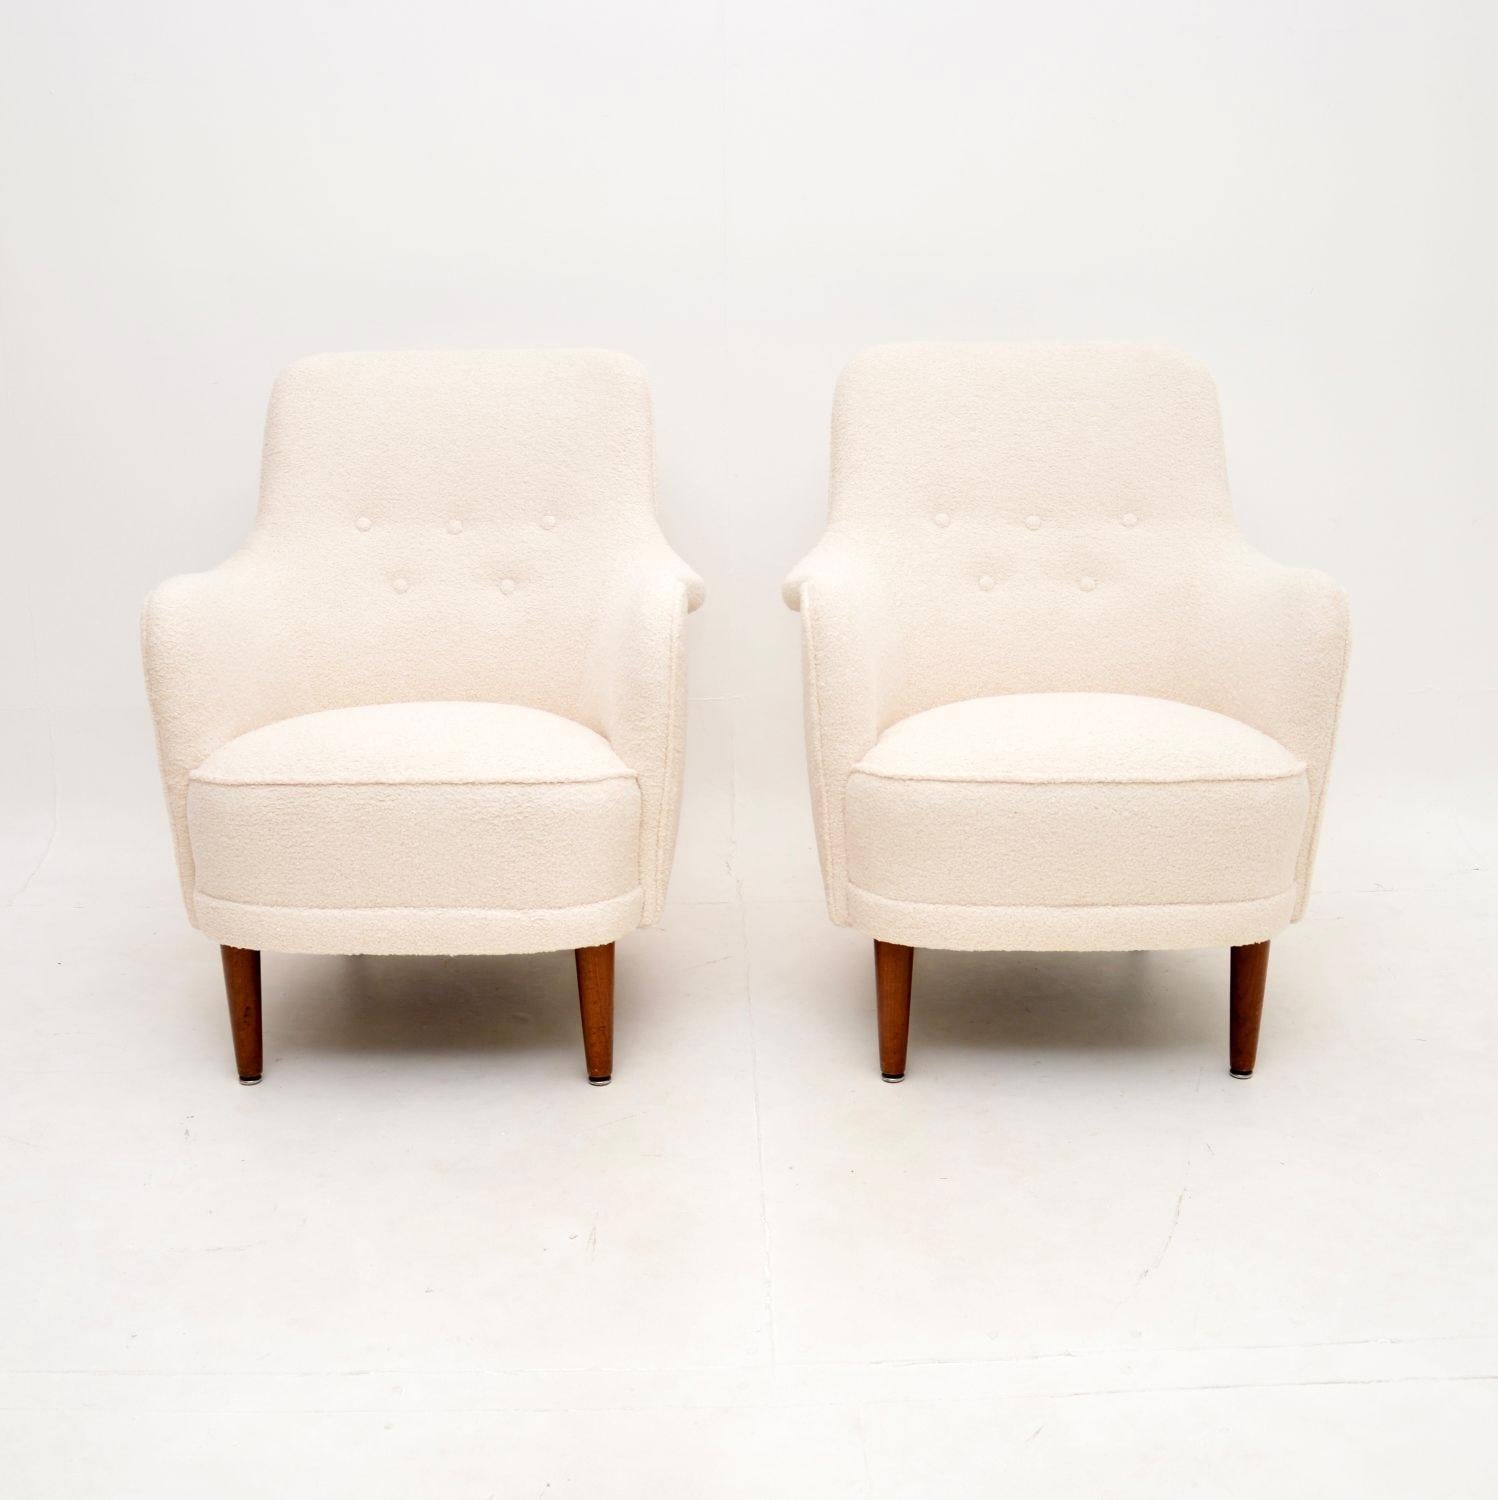 A stunning pair of vintage Swedish Samsas armchairs by Carl Malmsten. They were recently imported from Sweden, they date from around the 1960’s.

The quality is absolutely outstanding, they are generous in proportions and are extremely comfortable.